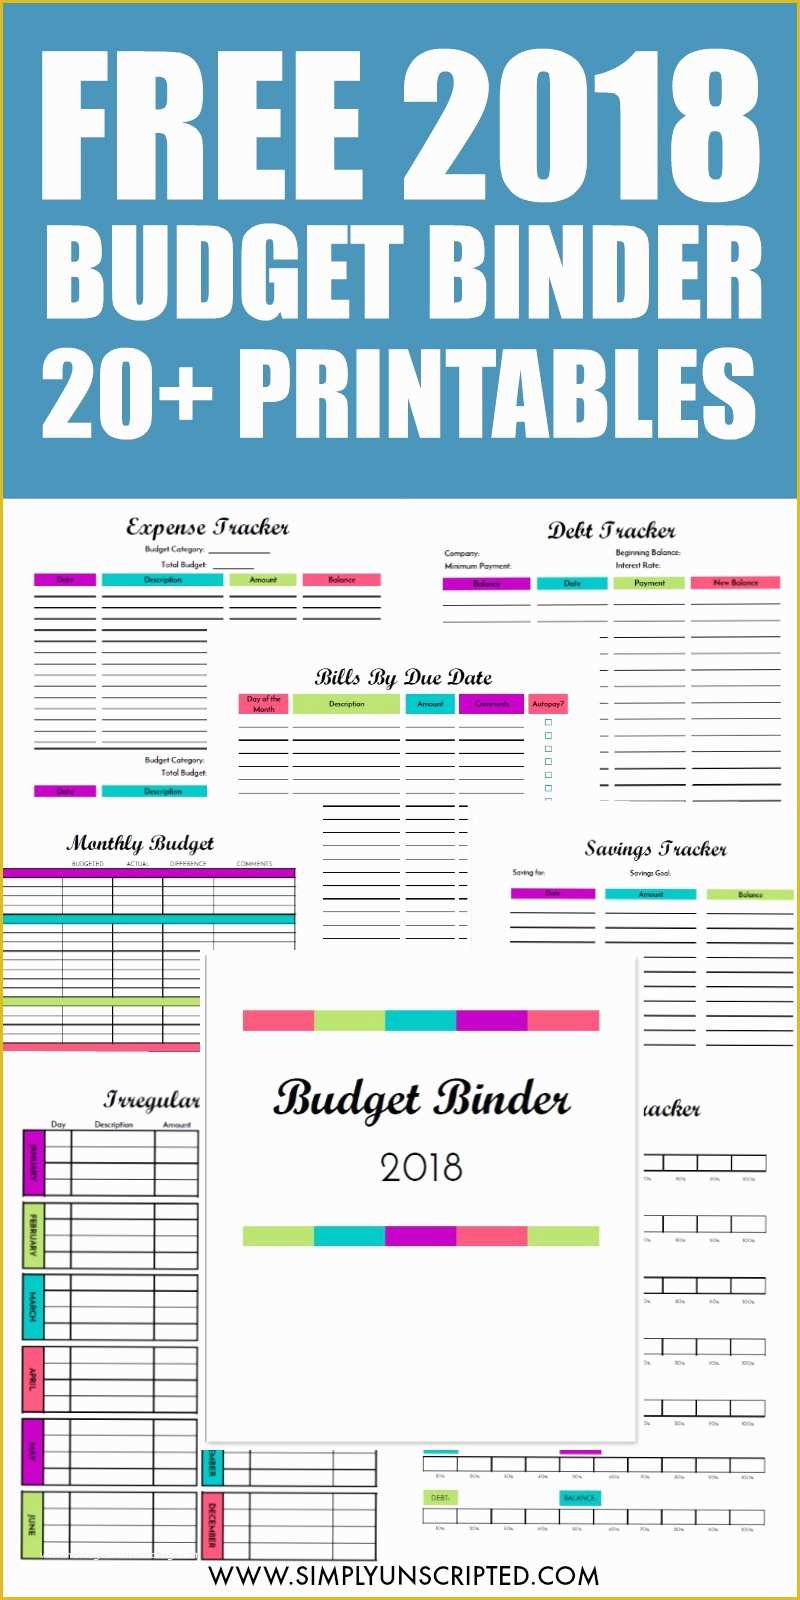 Free Printable Budget Templates Of Free 2018 Bud Binder Printables Simply Unscripted